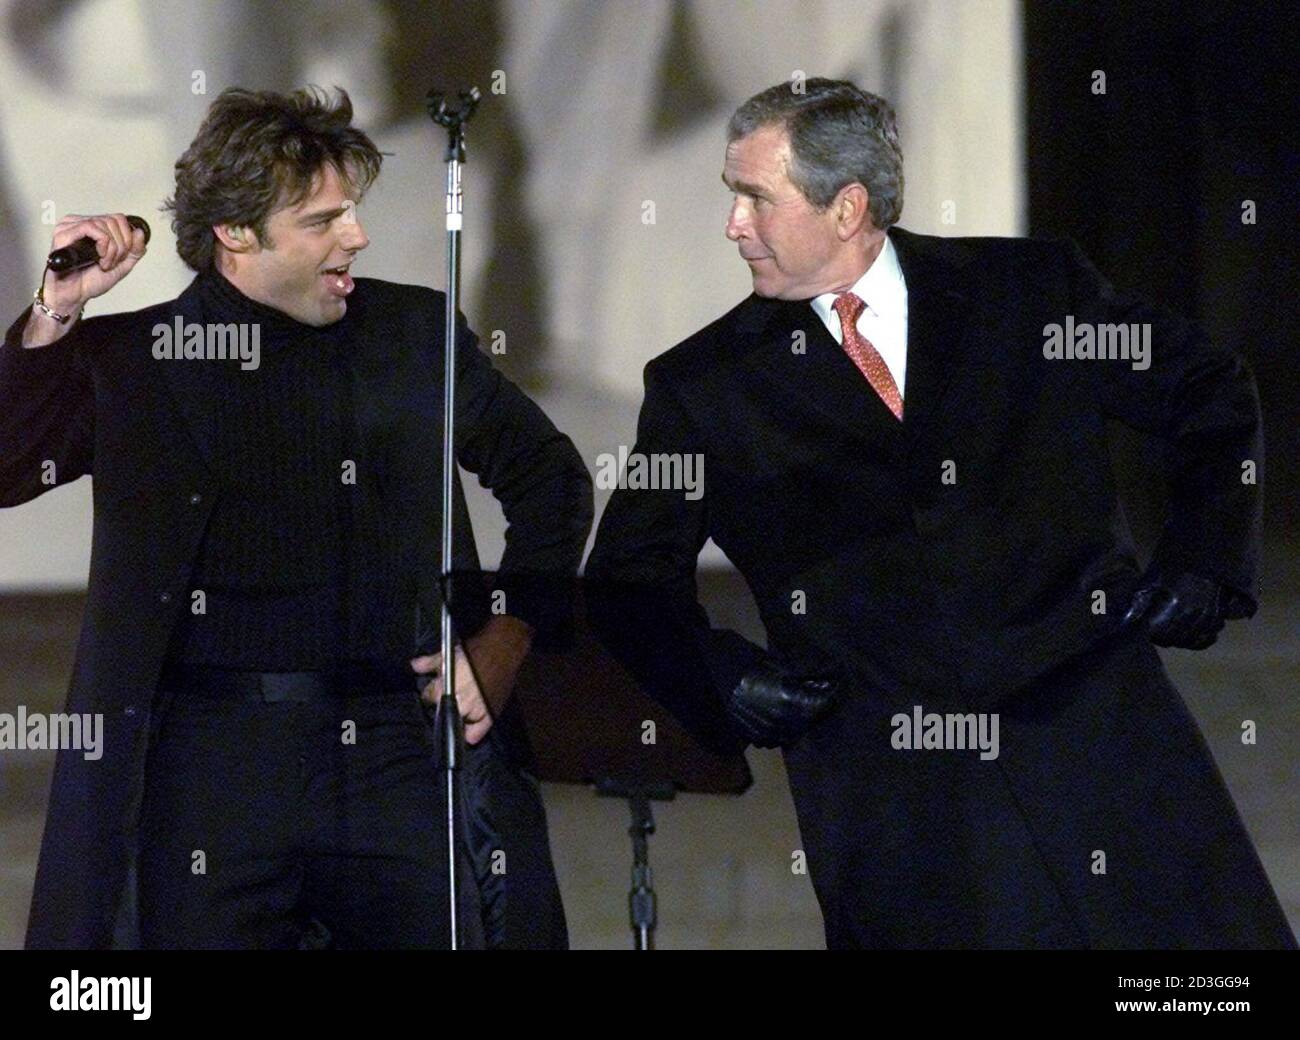 President-elect George W. Bush (R) dances with singer Ricky Martin at the opening ceremony of the inauguration at the Lincoln Memorial in Washington January 18, 2001. Bush will be sworn in as the 43rd president on January 20. Stock Photo